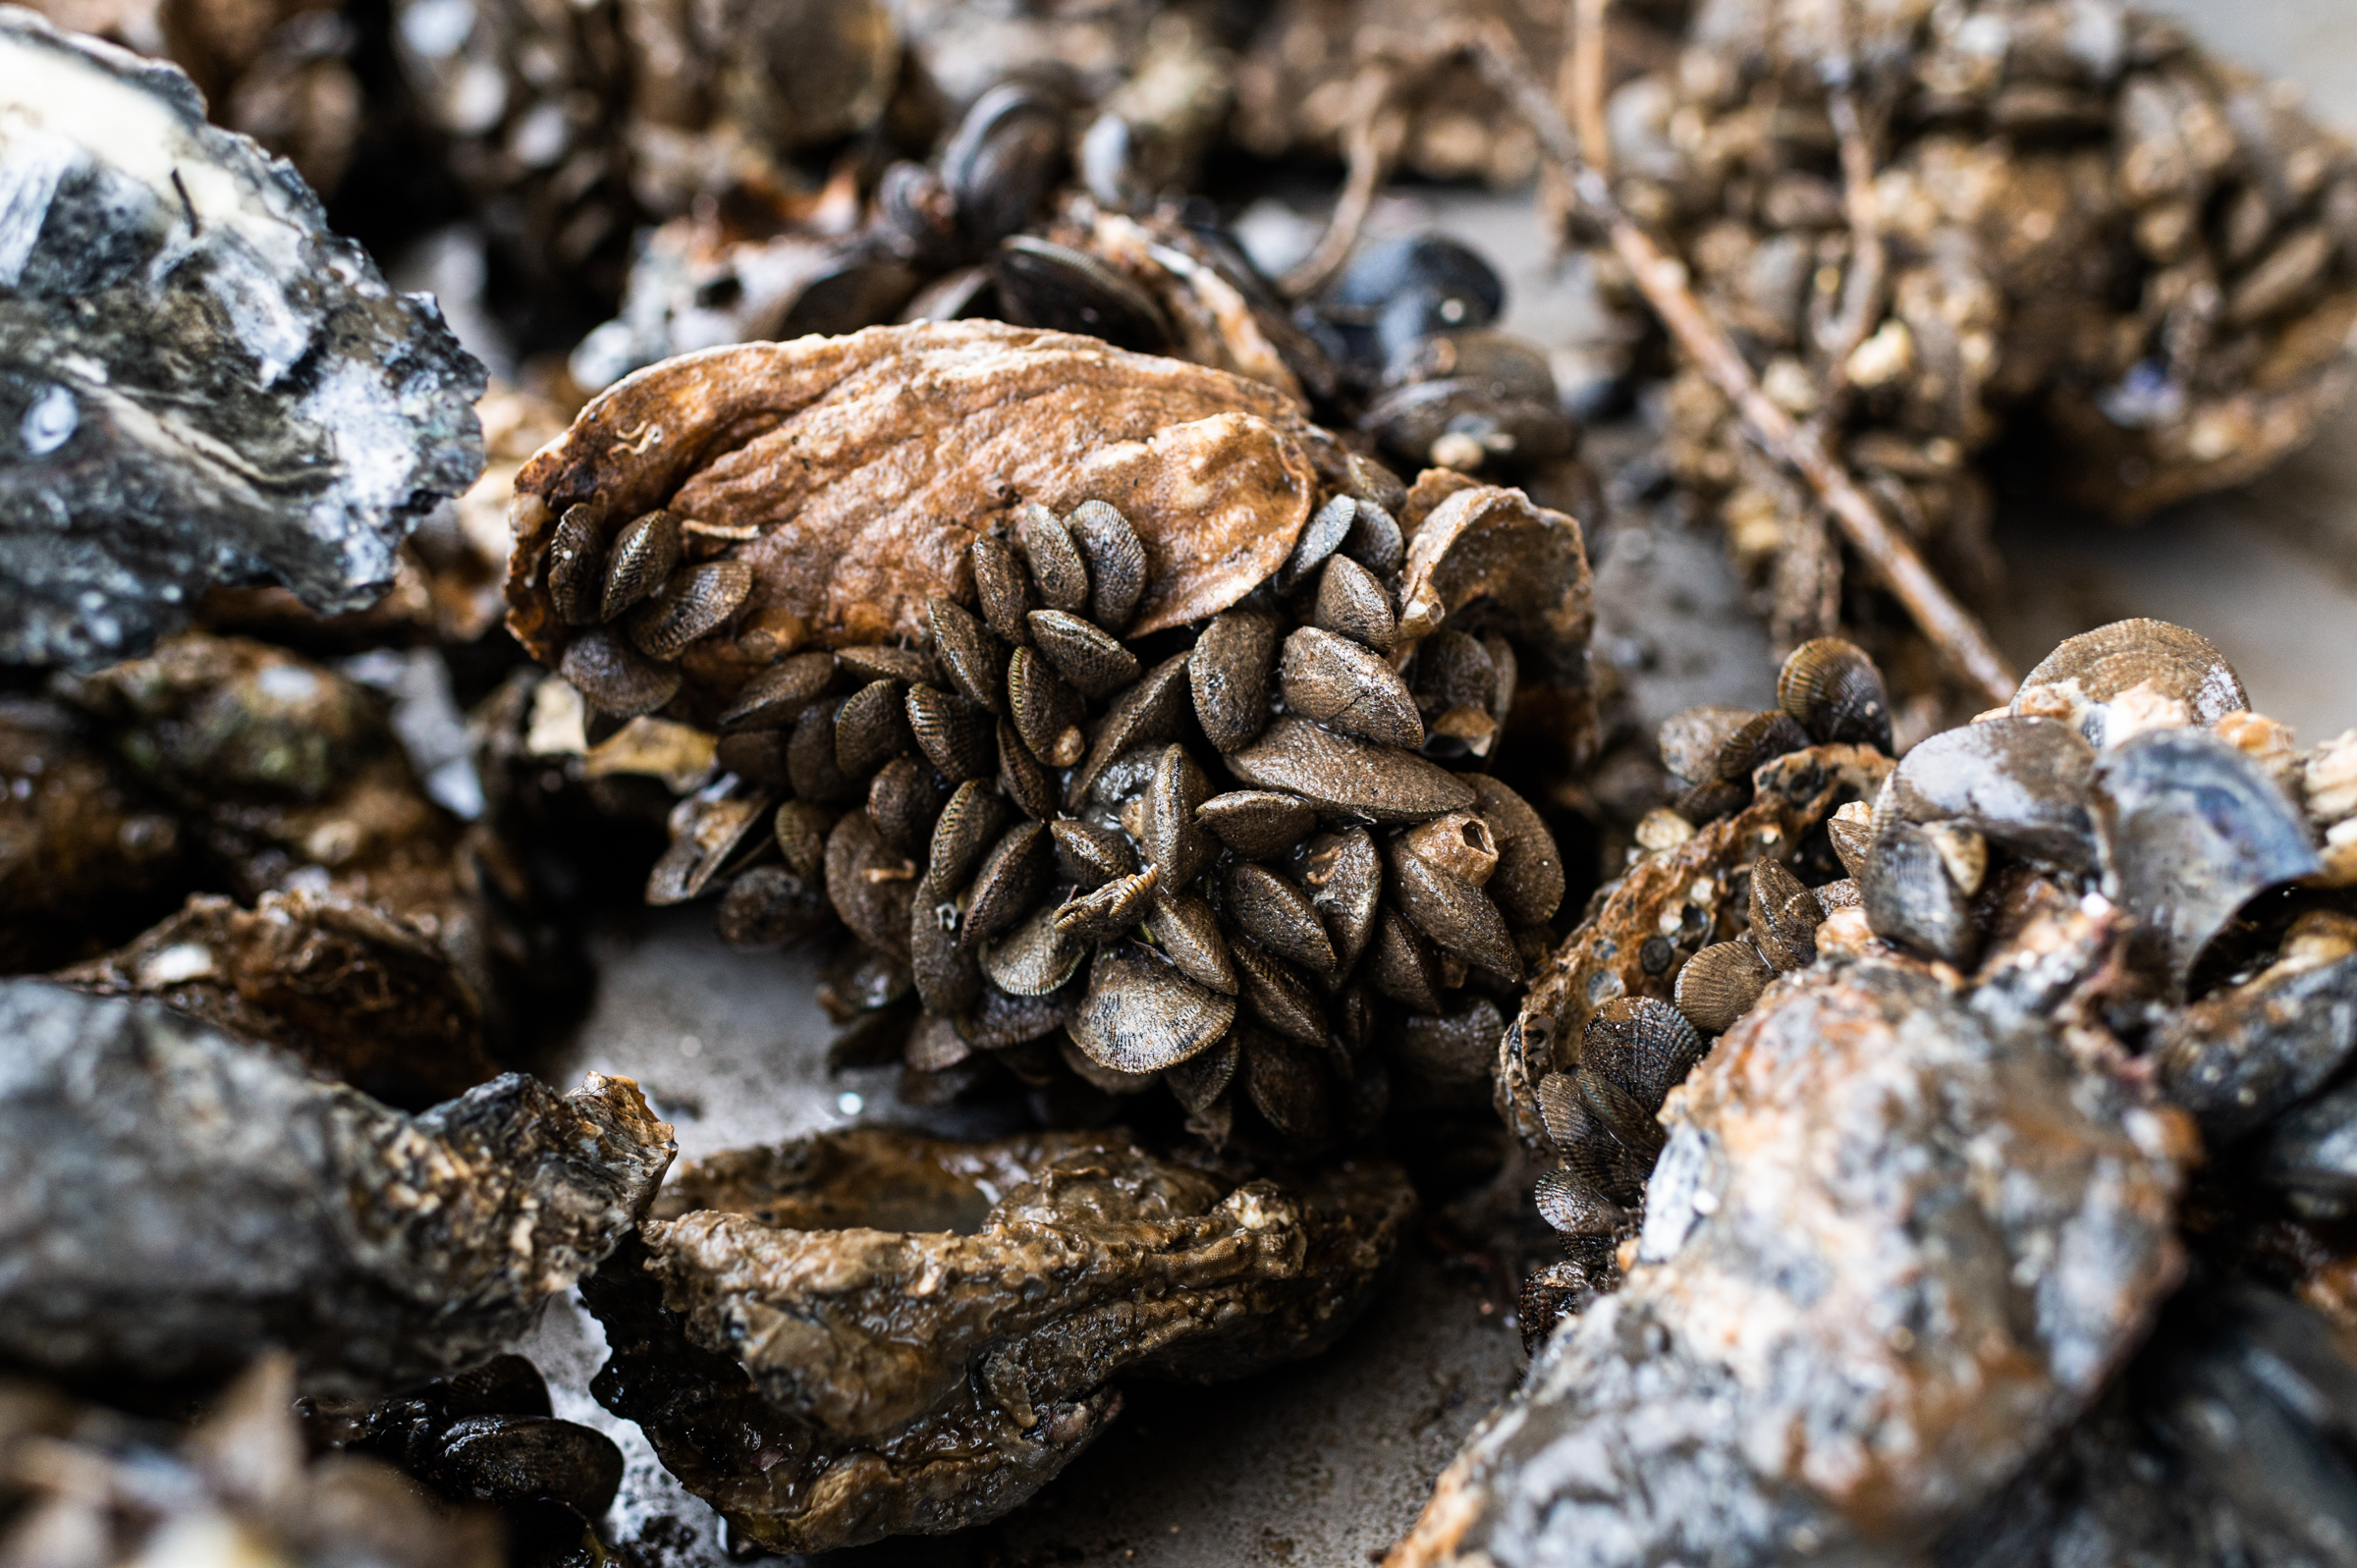 Wild caught oysters are often covered in mussels